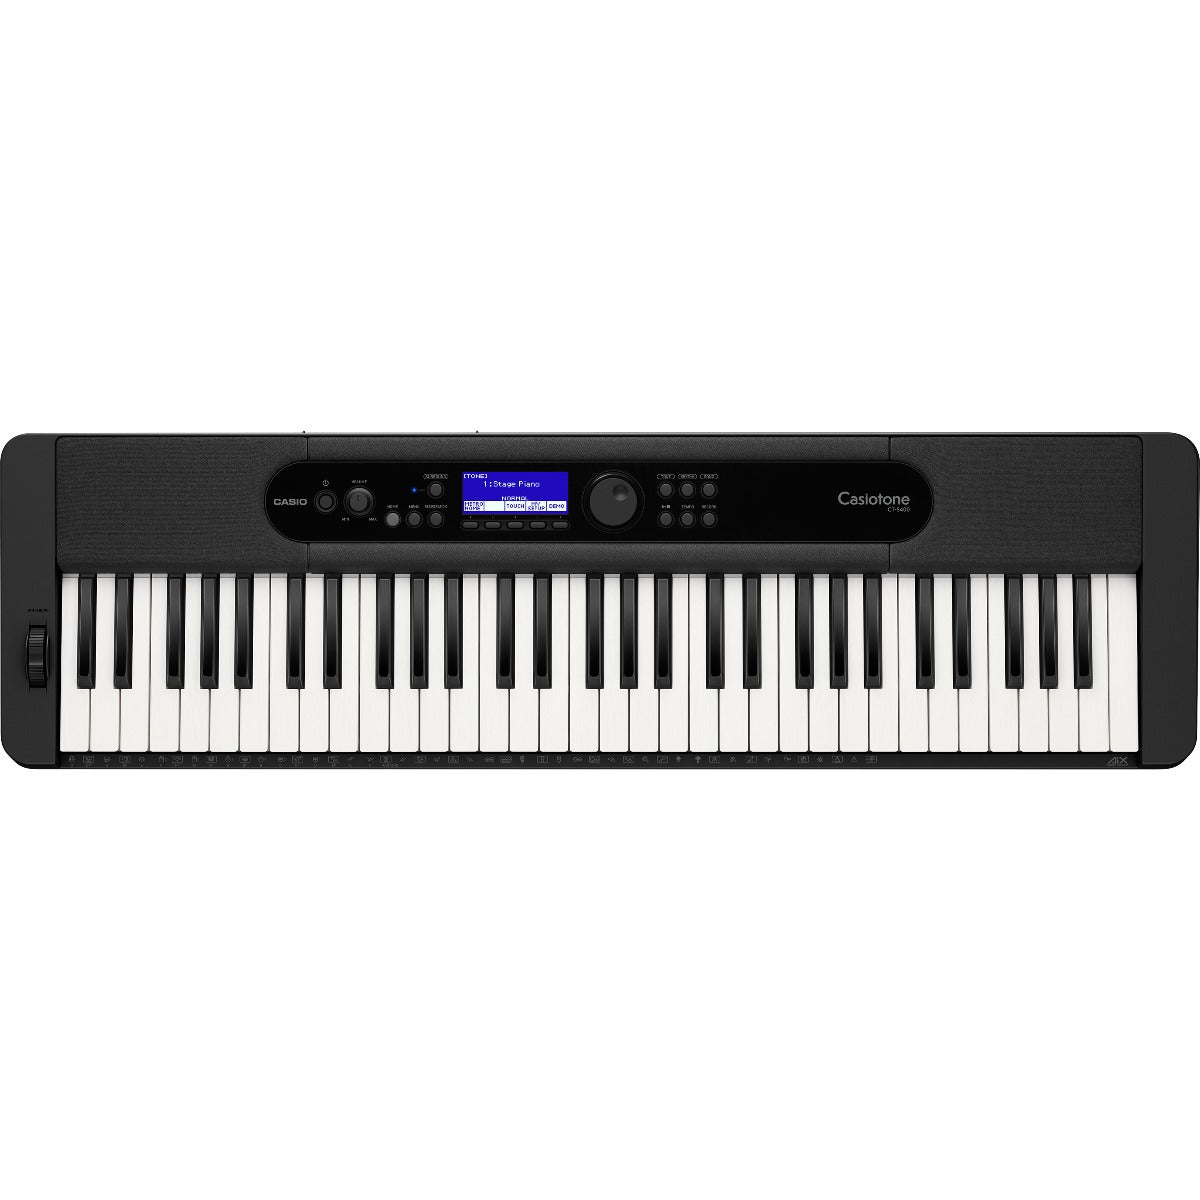 Top view of Casio Casiotone CT-S400 Portable Keyboard - Black